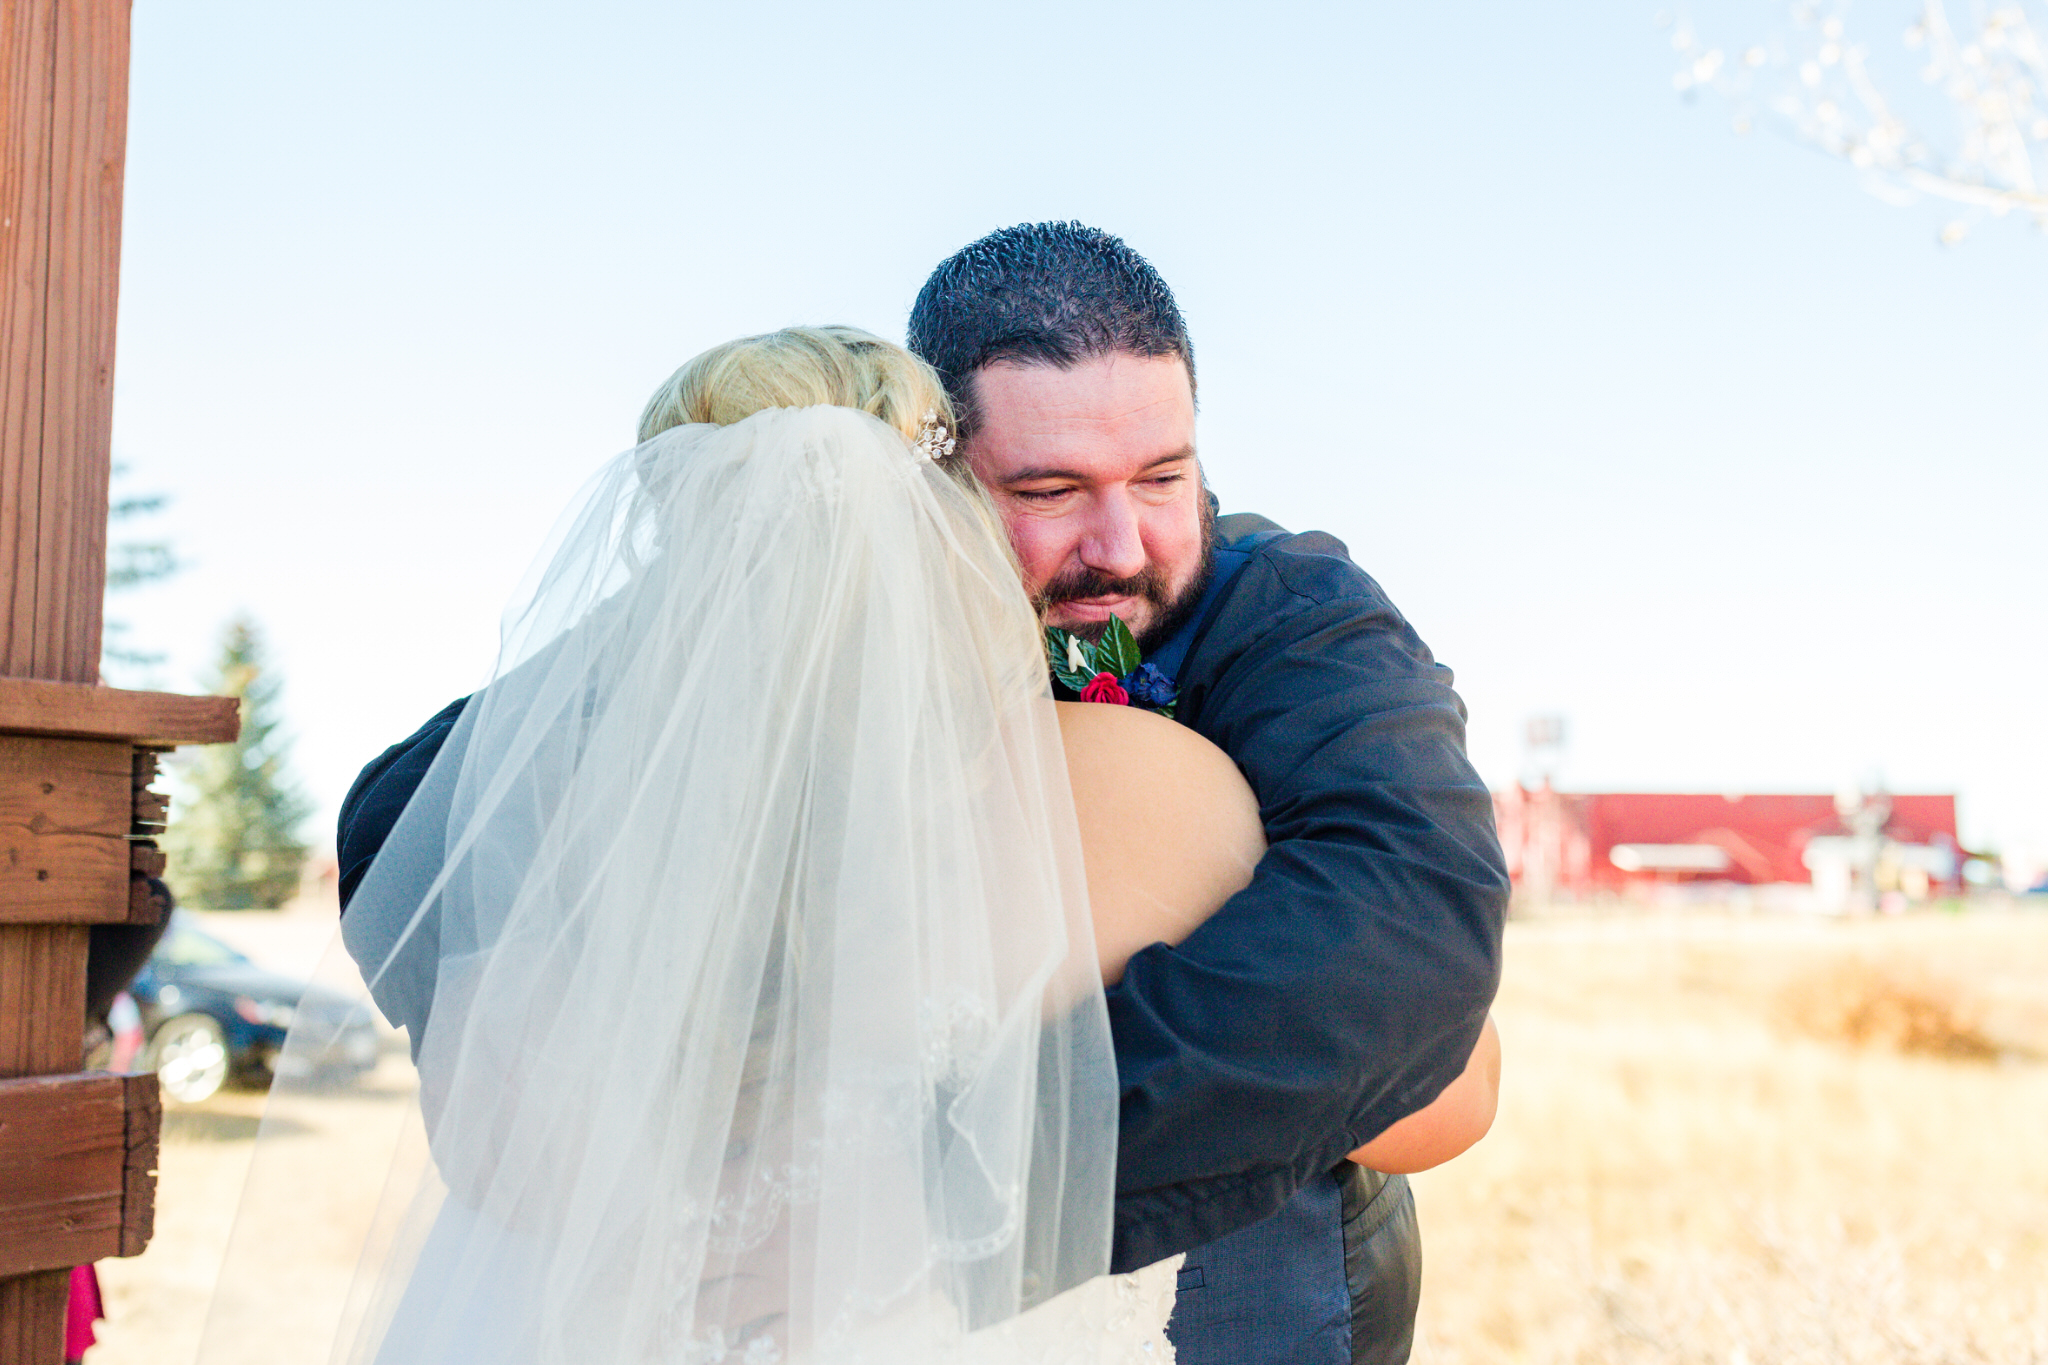 Groom reacting emotionally to seeing his bride for the first time. Briana and Kevin's Terry Bison Ranch Wedding by Wyoming Wedding Photographer Jennifer Garza, Wyoming Wedding, Wyoming Wedding Photographer, Wyoming Engagement Photographer, Wyoming Bride, Couples Goals, Wyoming Wedding, Wedding Photographer, Wyoming Photographer, Wyoming Wedding Photography, Wedding Inspiration, Destination Wedding Photographer, Fall Wedding, Ranch Wedding, Rustic Wedding Inspiration, Wedding Dress Inspo